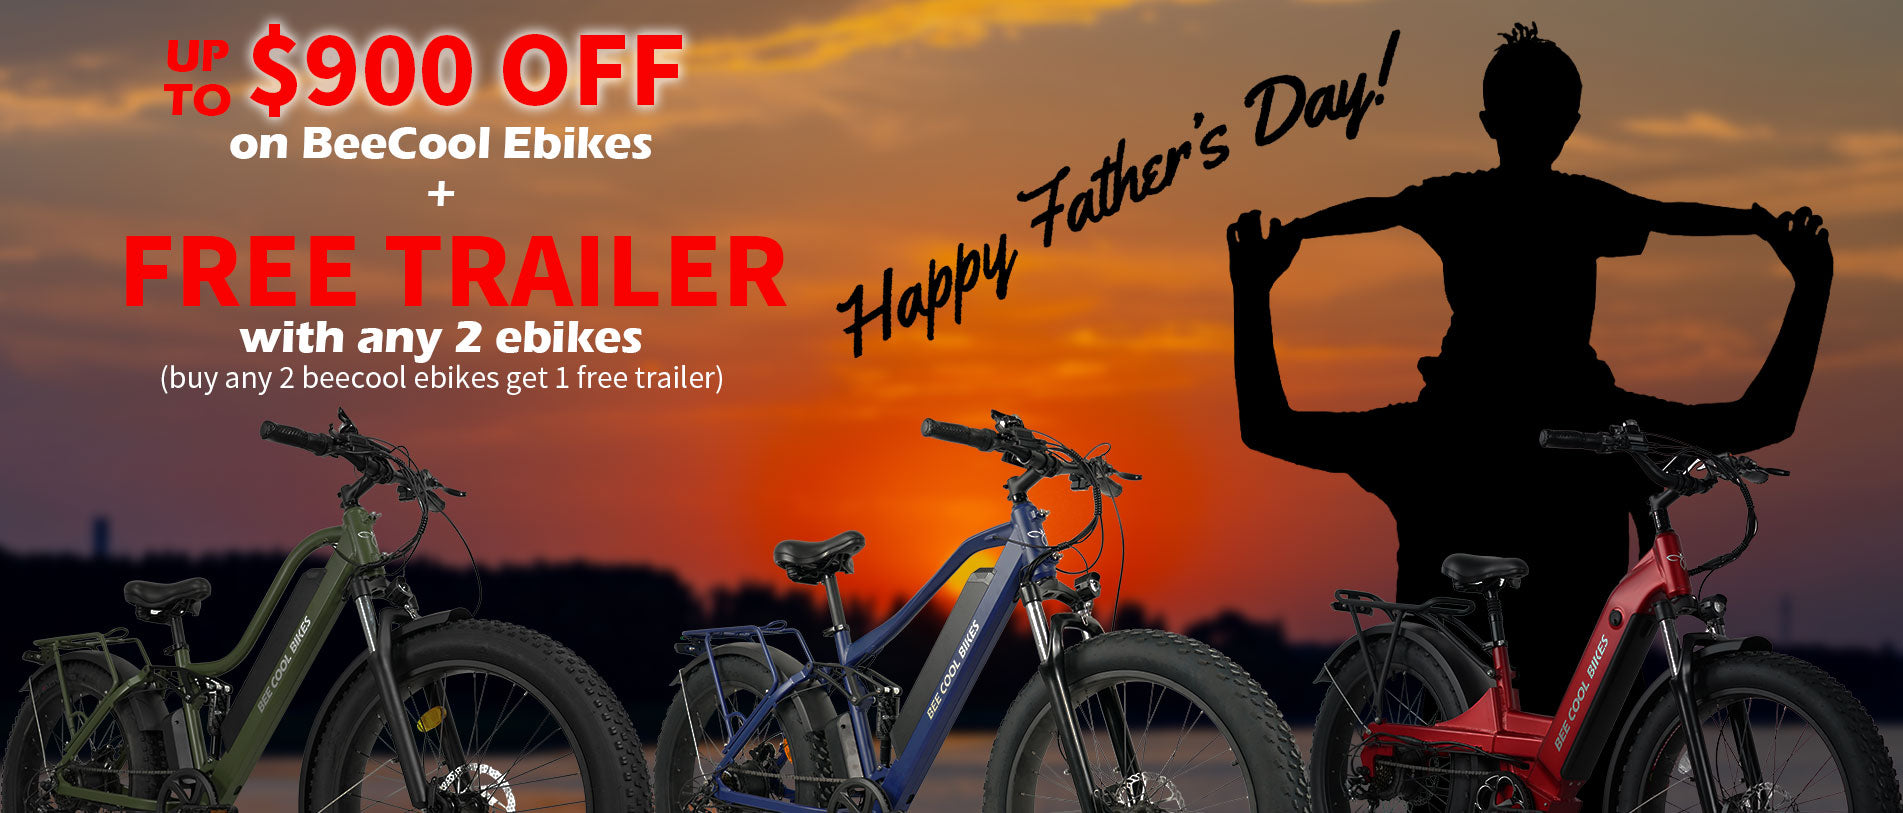 Surprise Your Dad this Father's Day with a Unique and Useful Gift: The Electric Bike